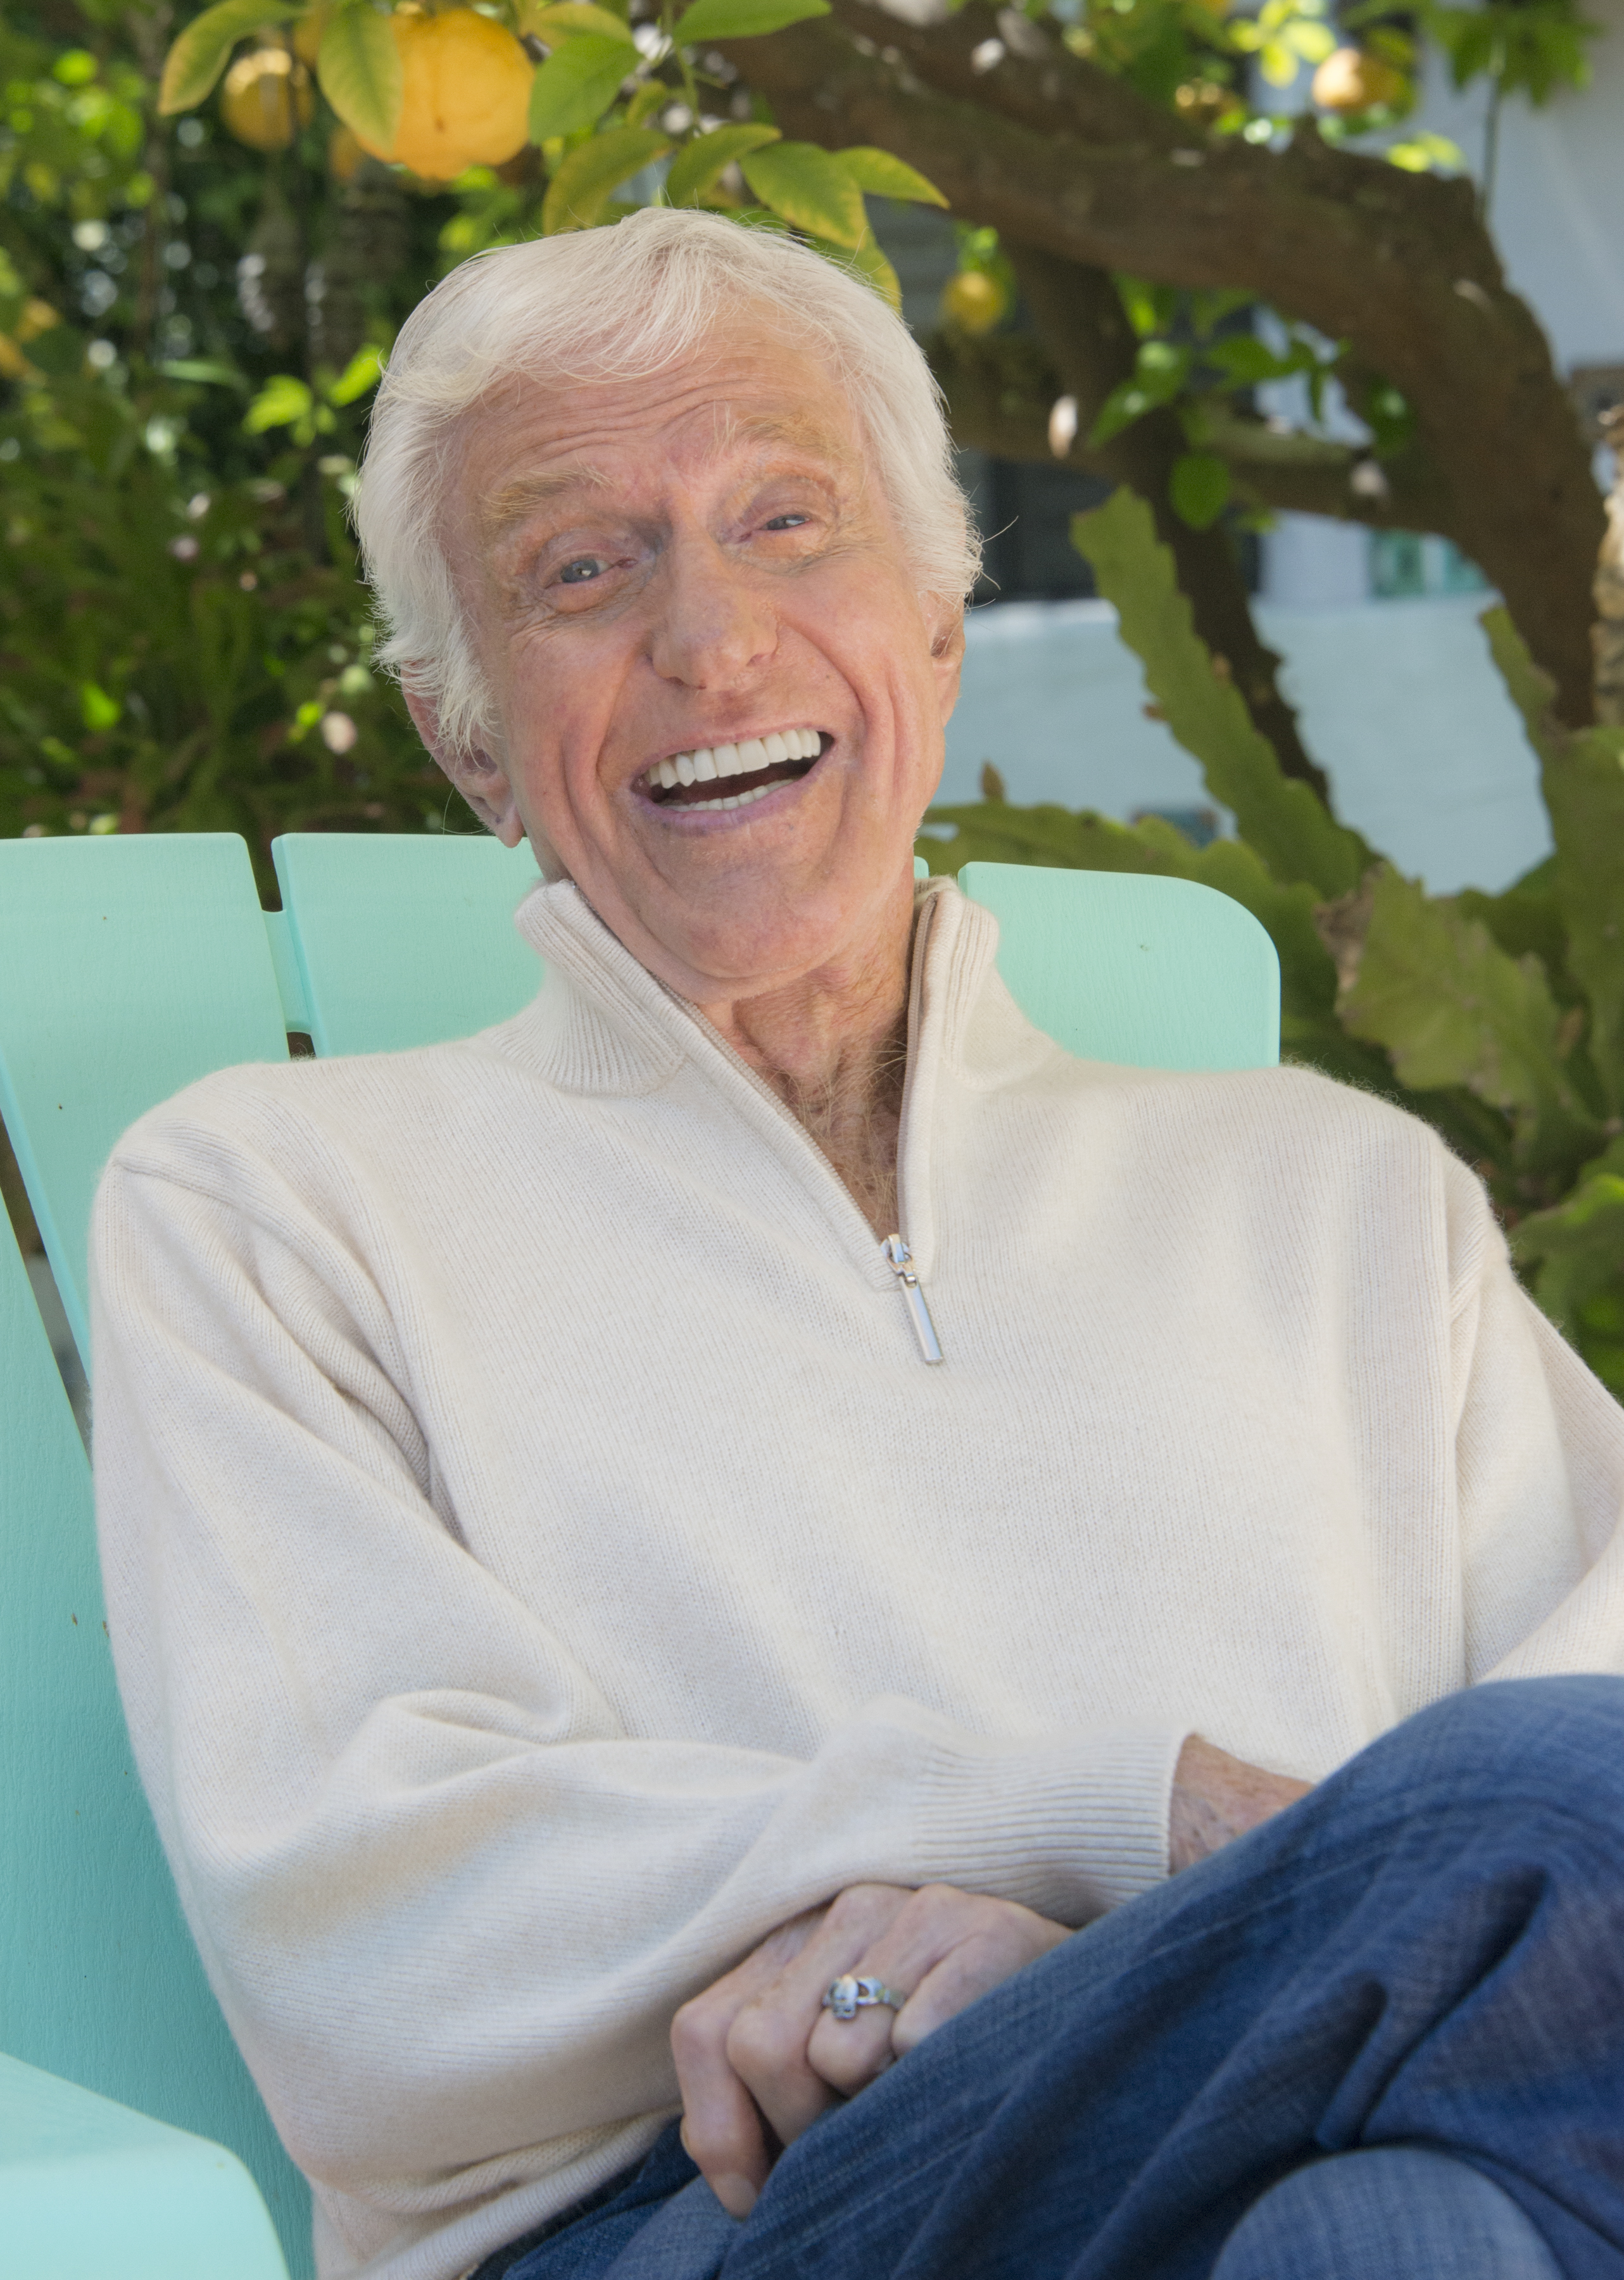 Dick Van Dyke photographed at home during a photo shoot on April 21, 2016 in Malibu, California | Source: Getty Images